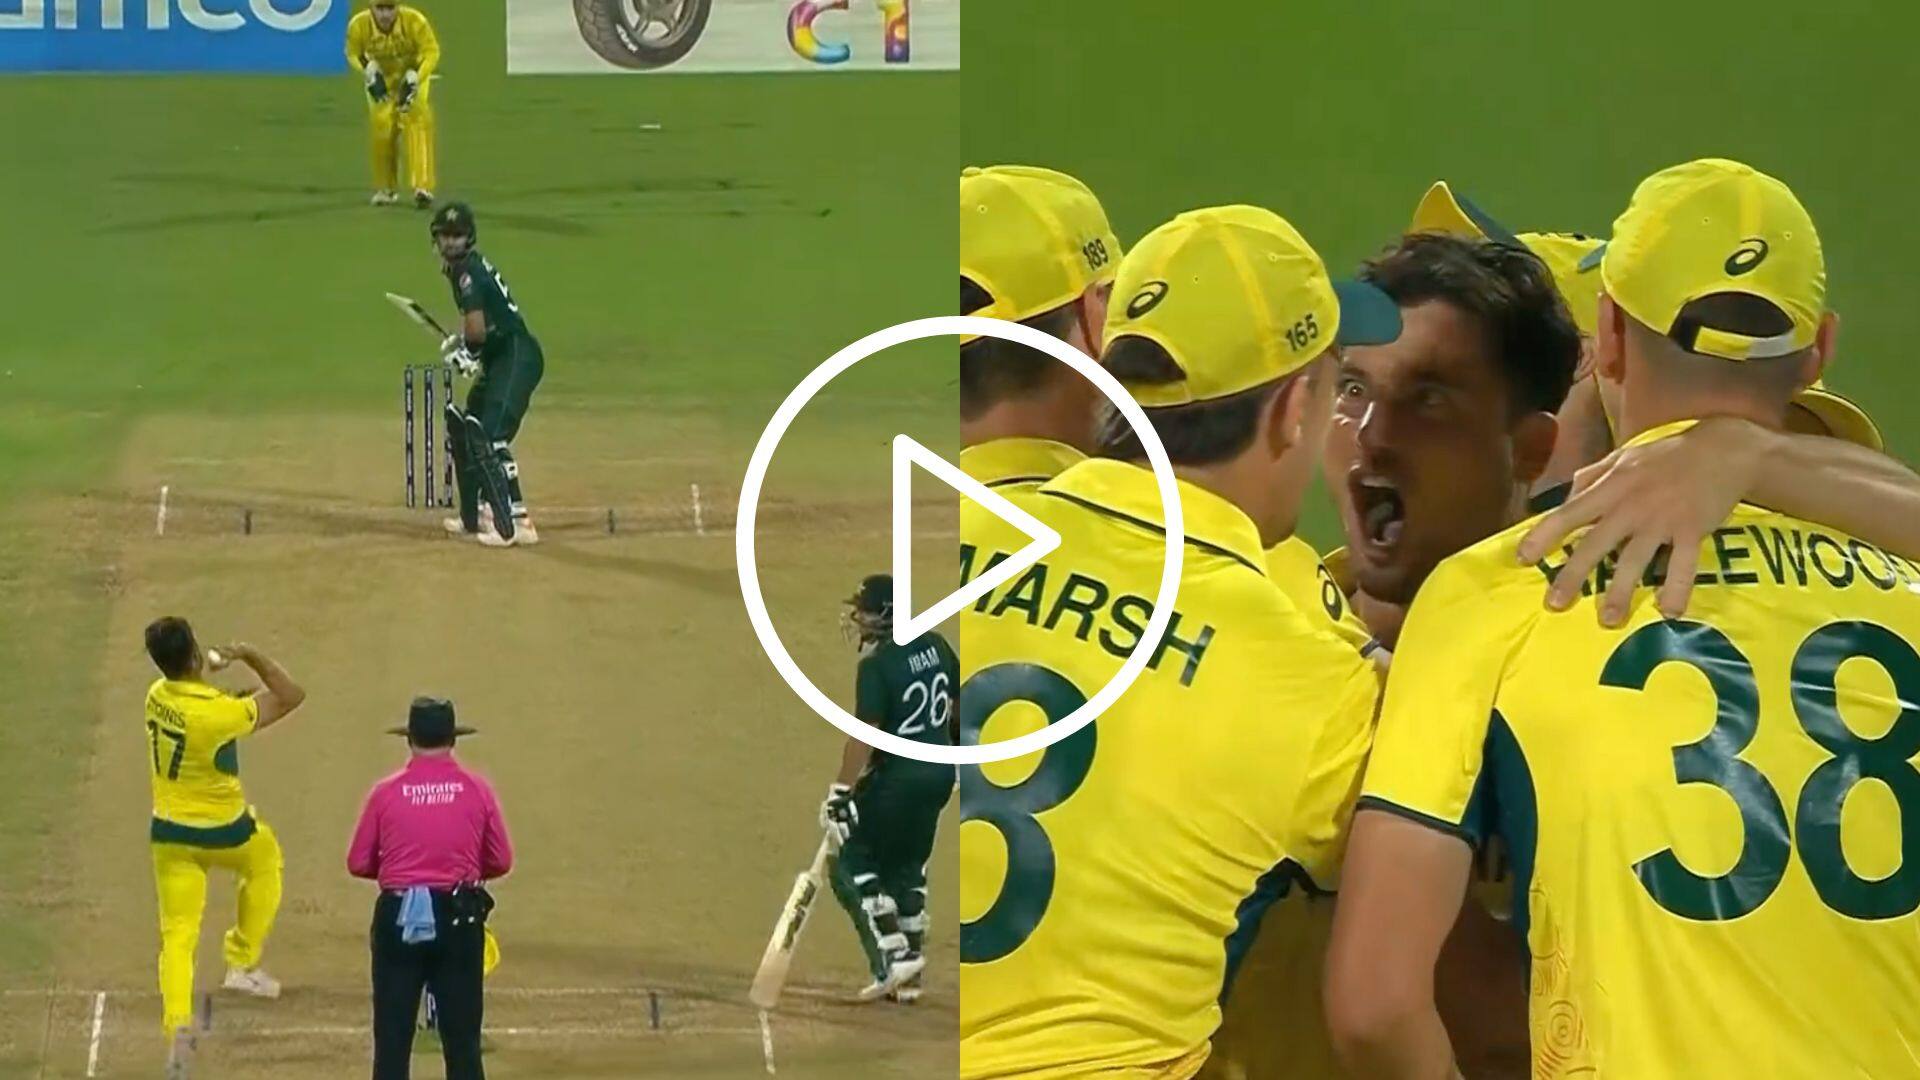 [Watch] Marcus Stoinis Stuns Abdullah Shafique With 'Deadly Bumper'